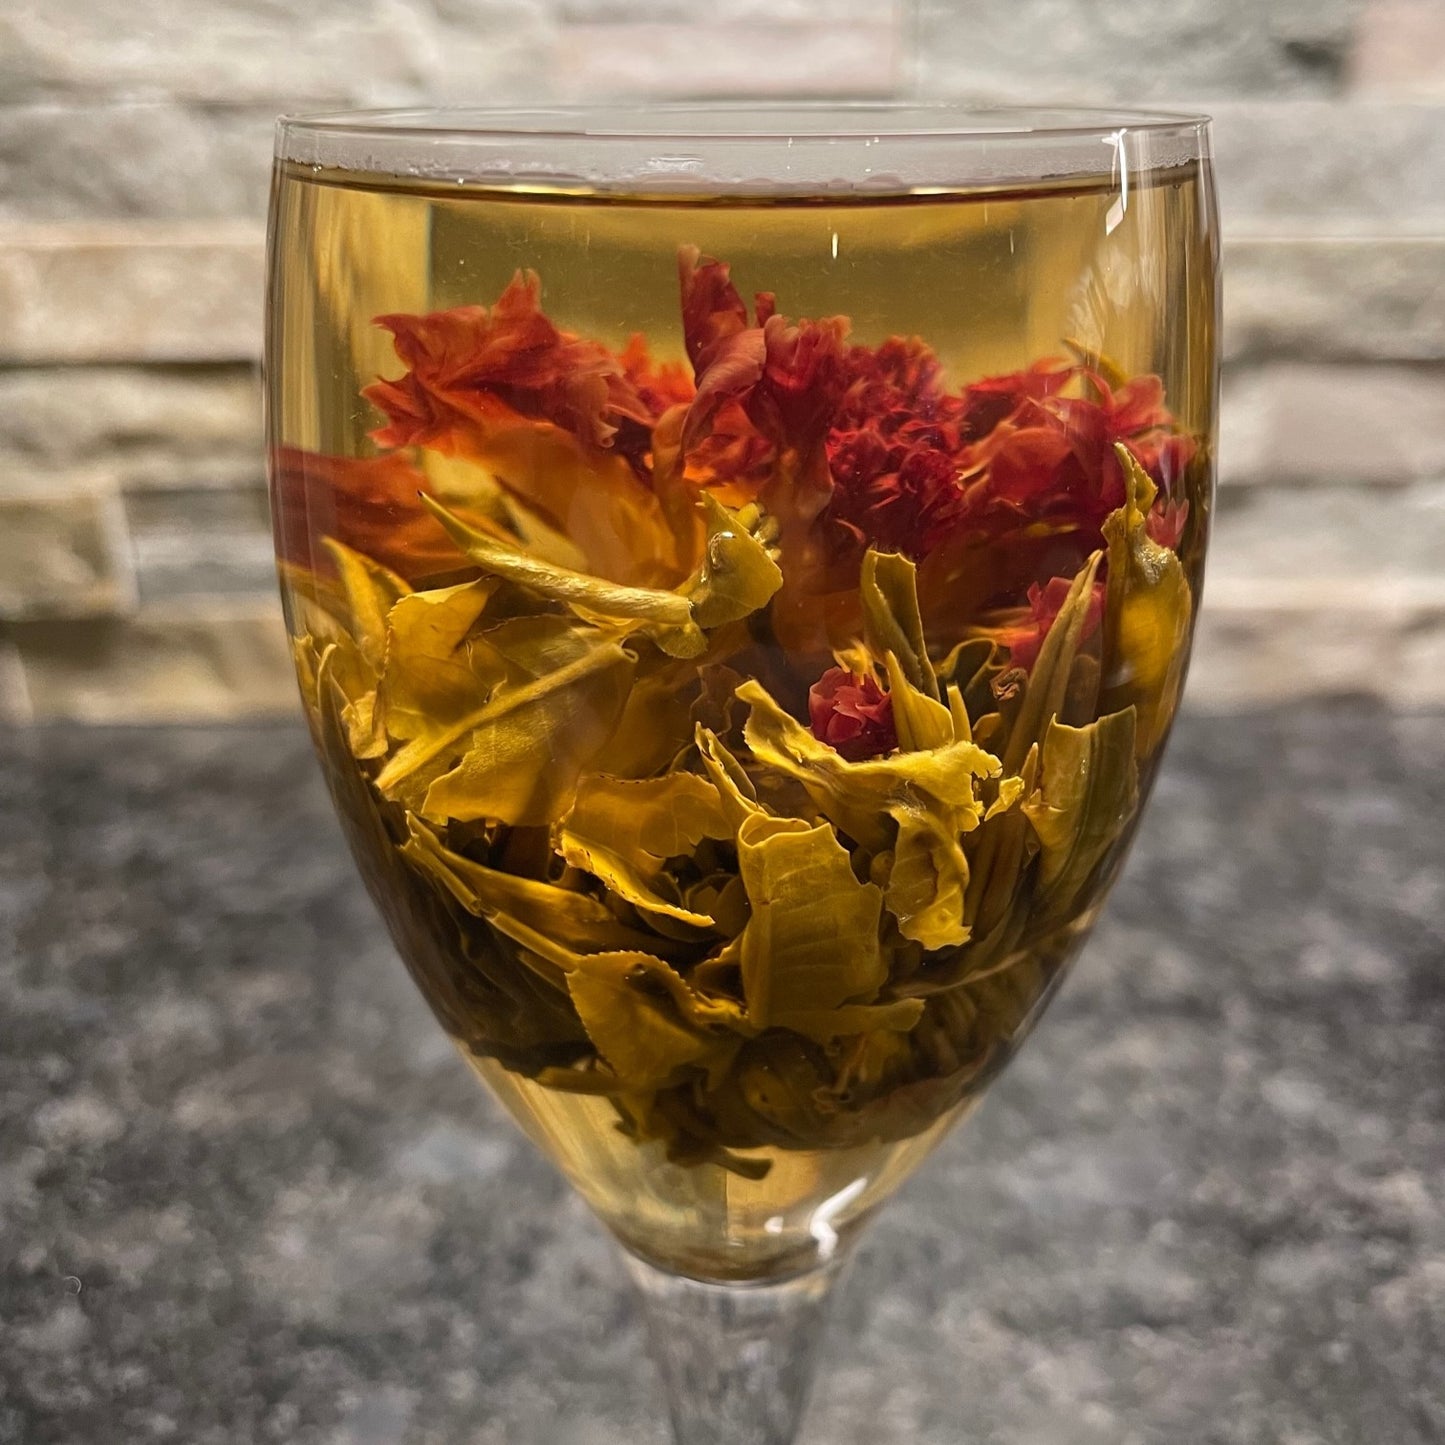 Four Blooming Teas